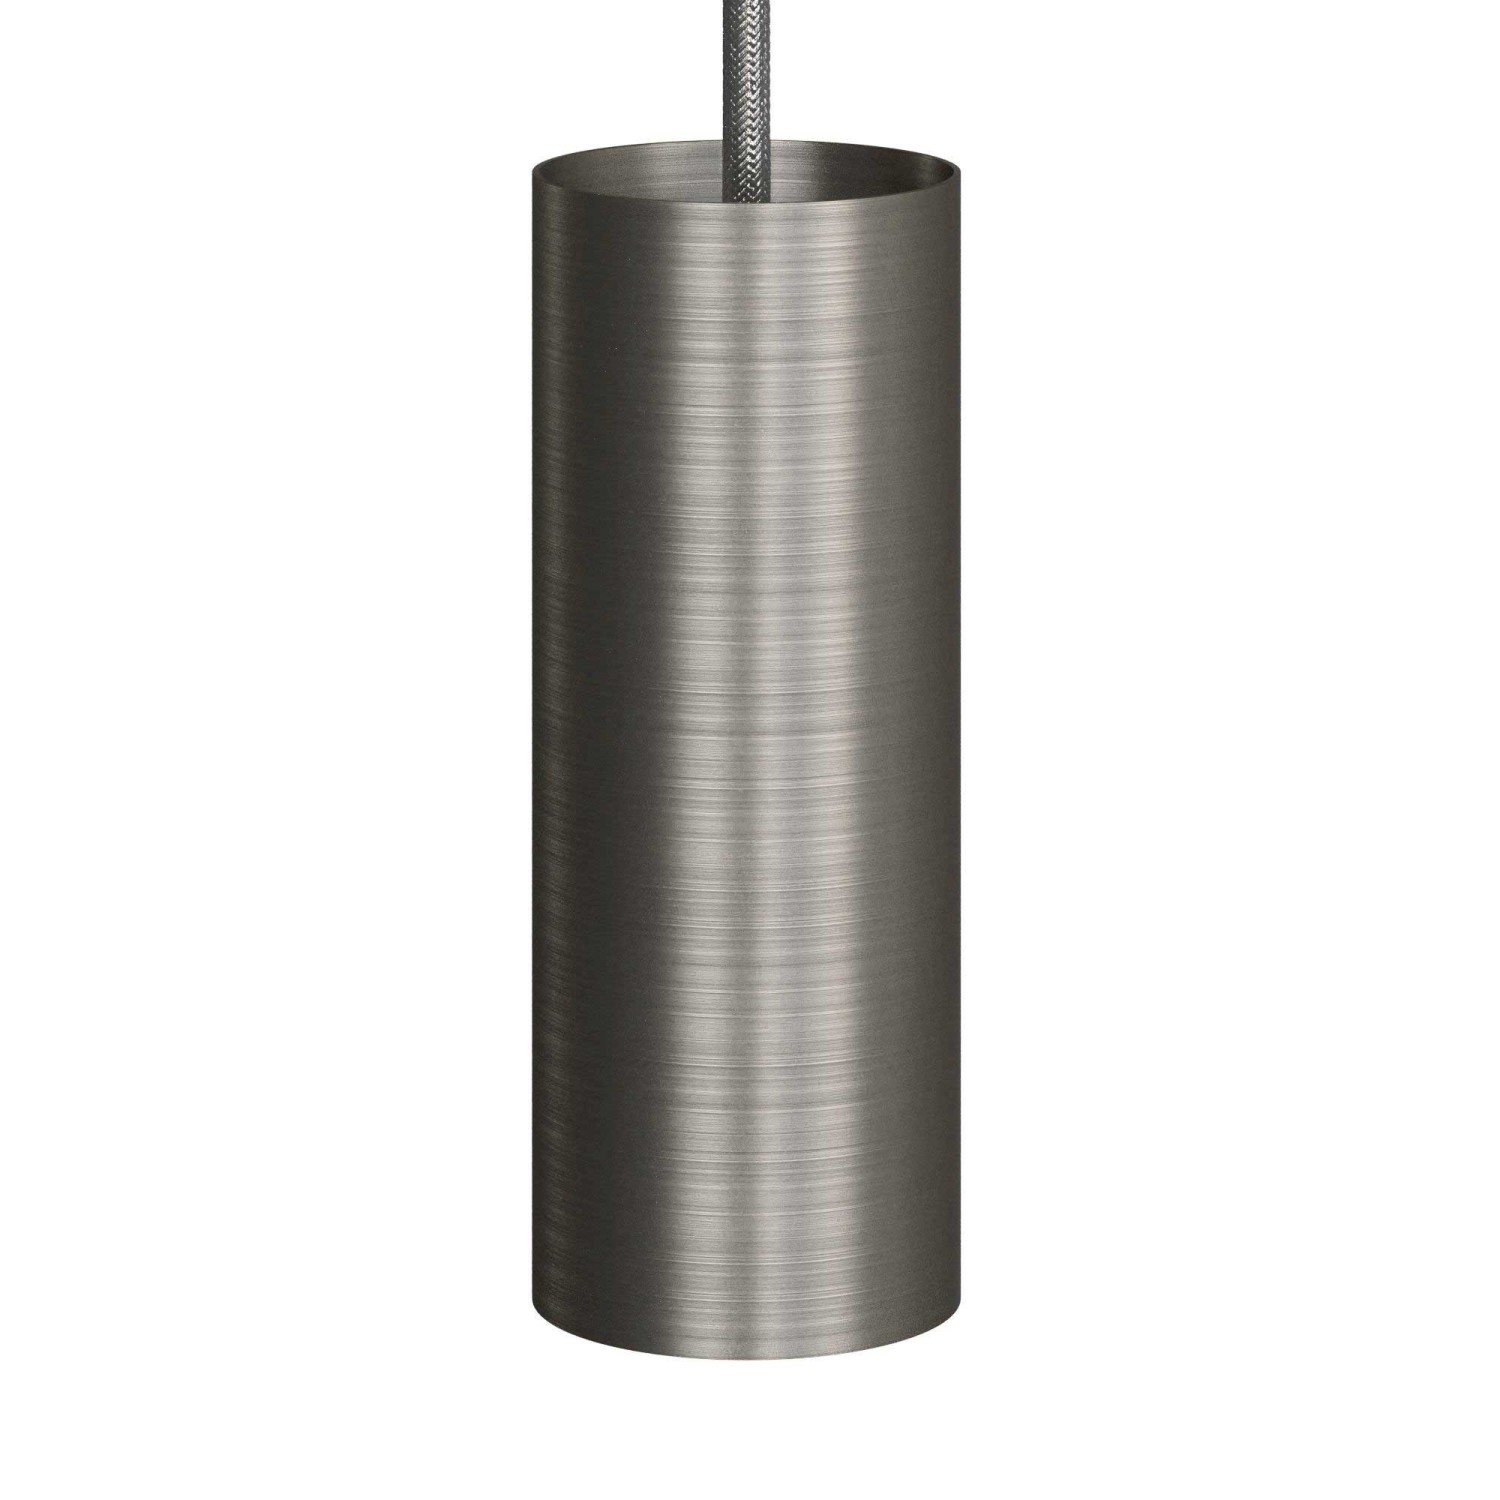 Pendant lamp with textile cable, Tub-E14 lampshade and metal details - Made in Italy